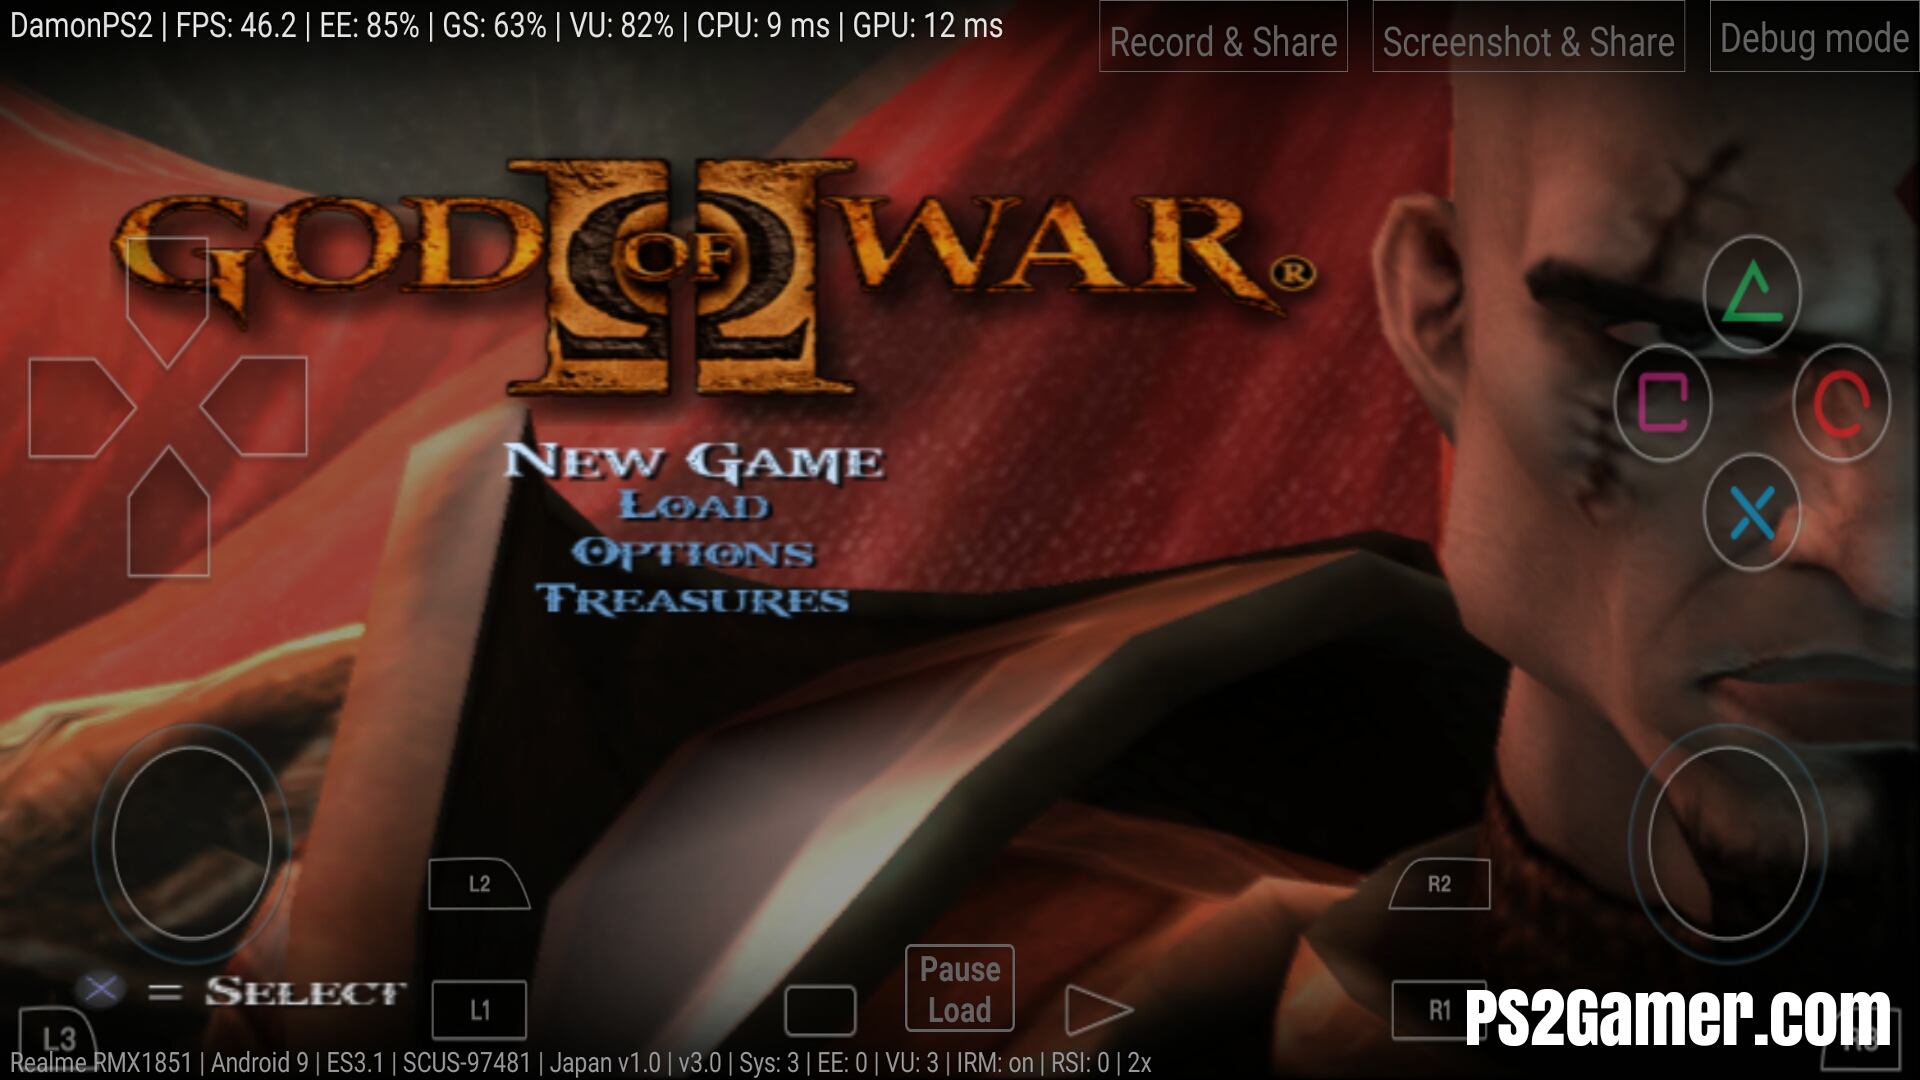 god of war 2 pc game highly compressed android